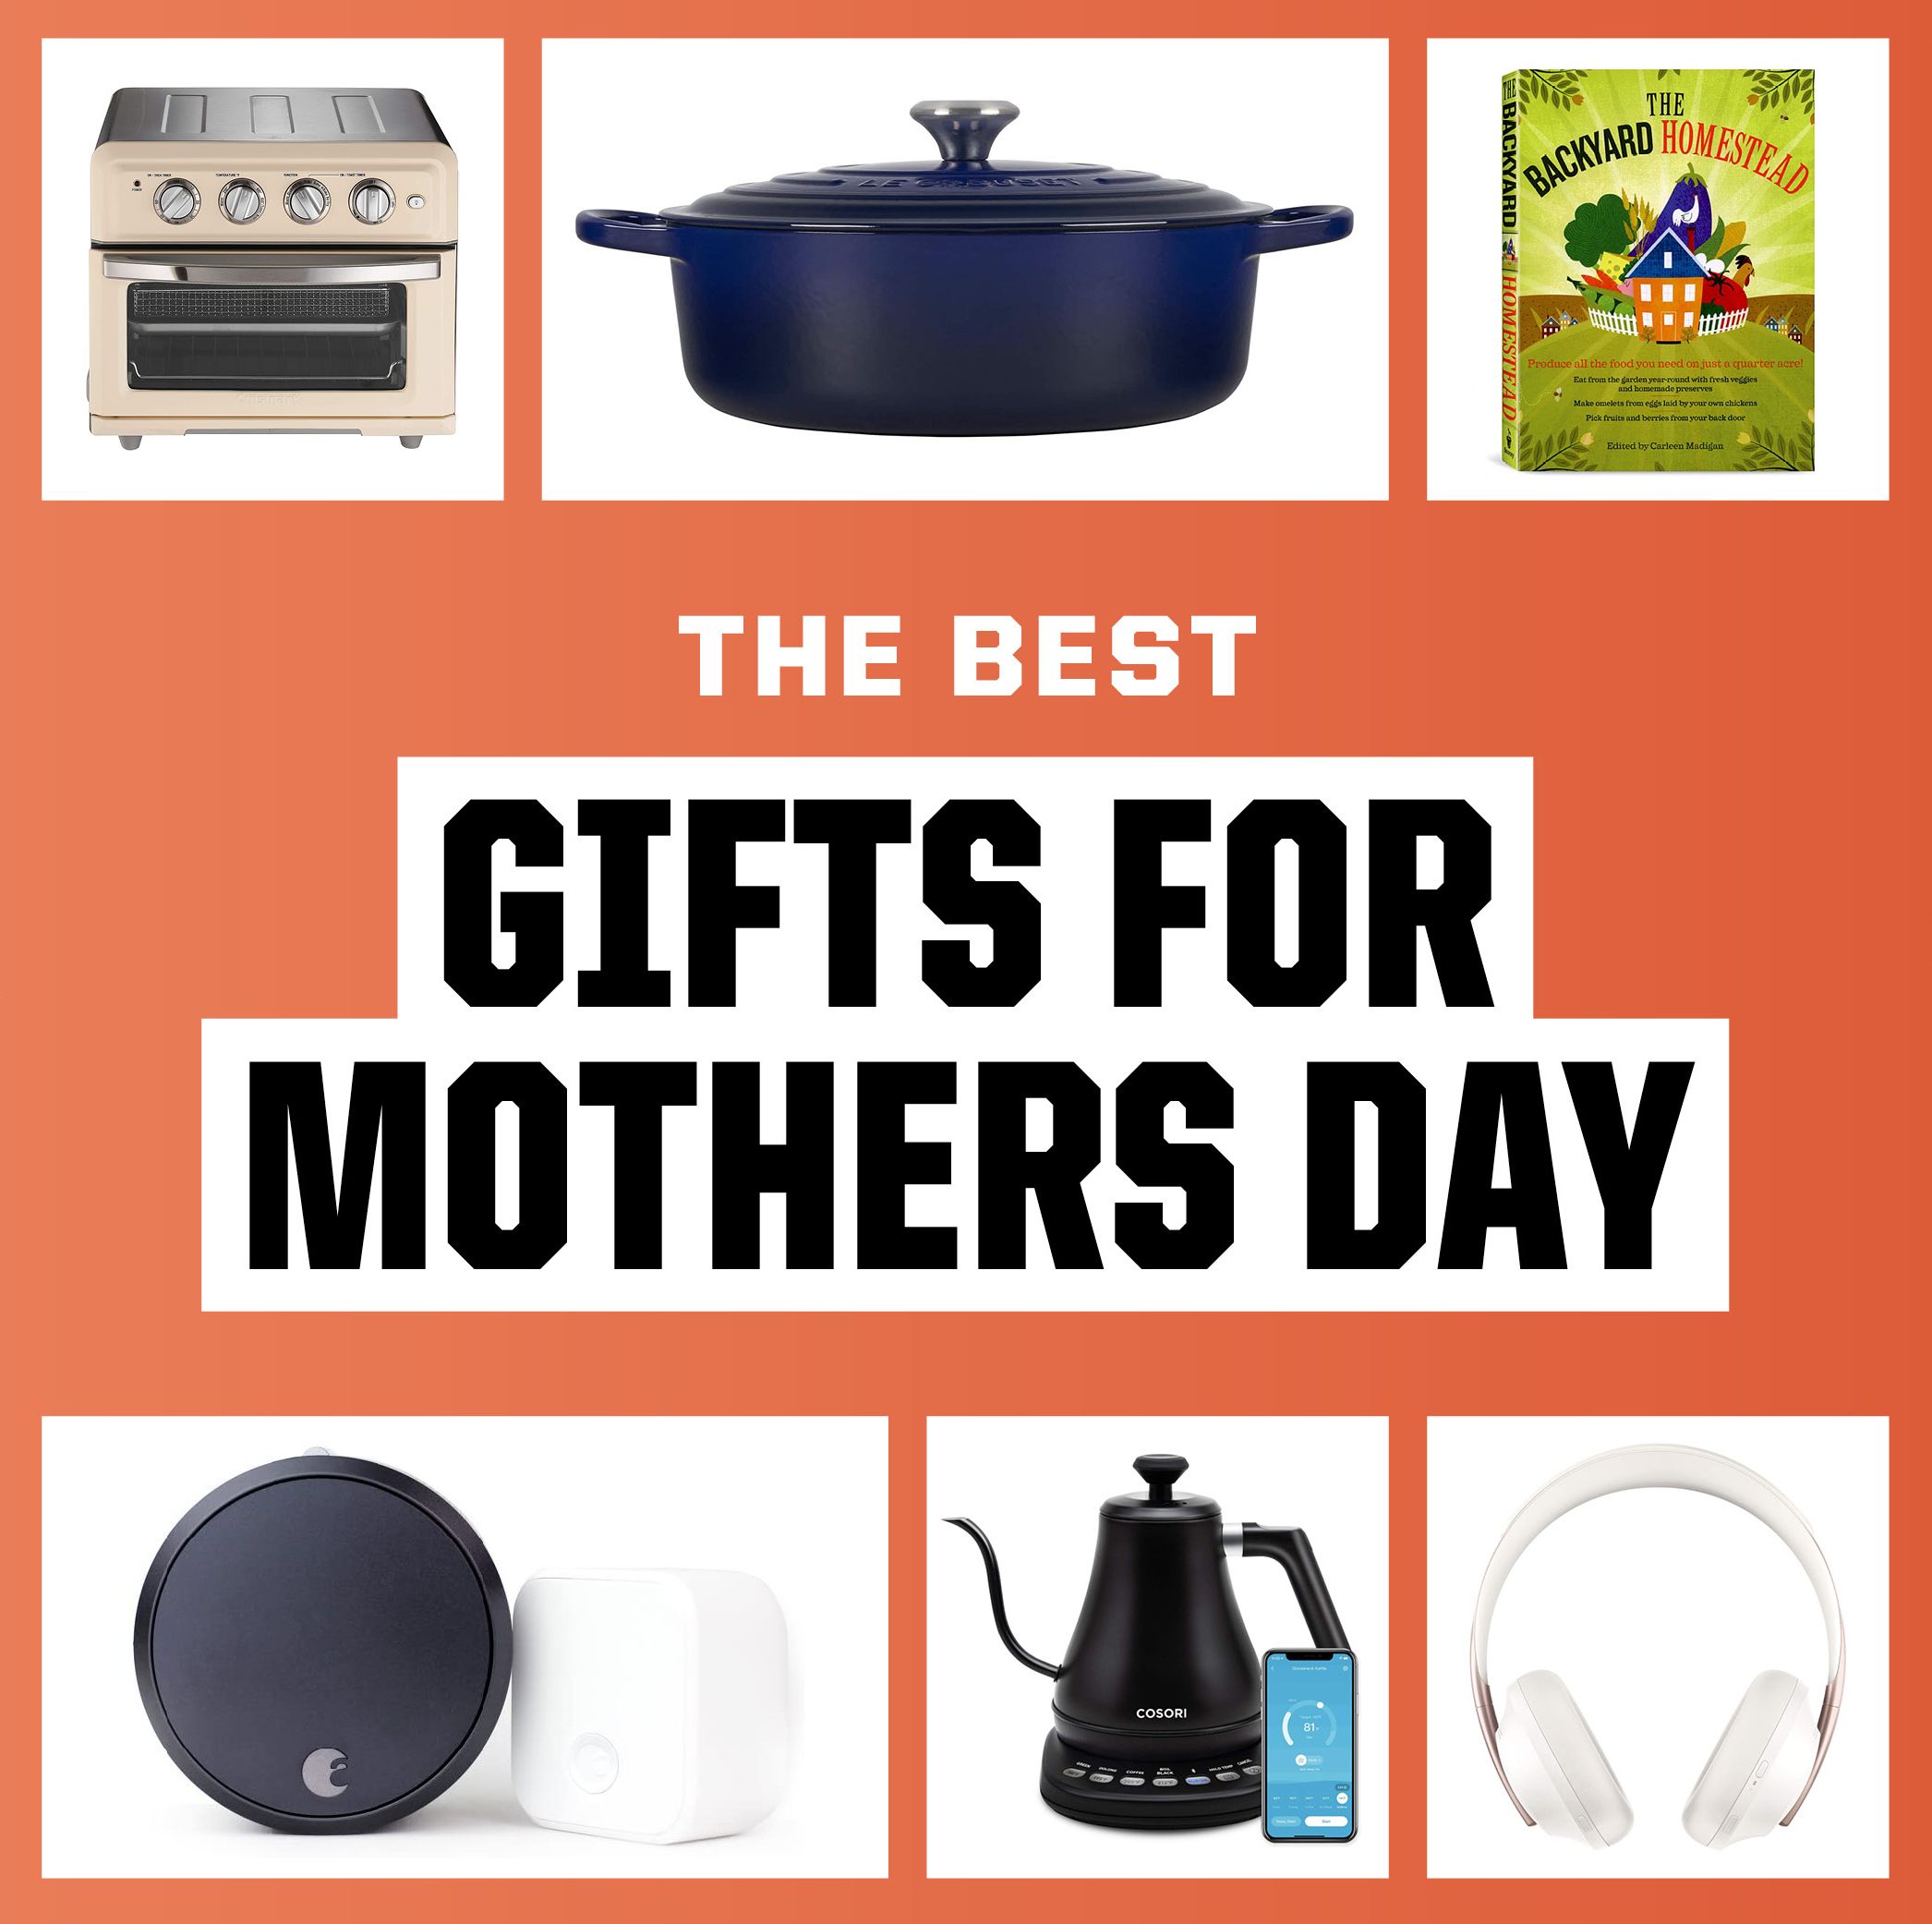 Get Mom One of These Thoughtful Yet Practical Gifts This Mother's Day